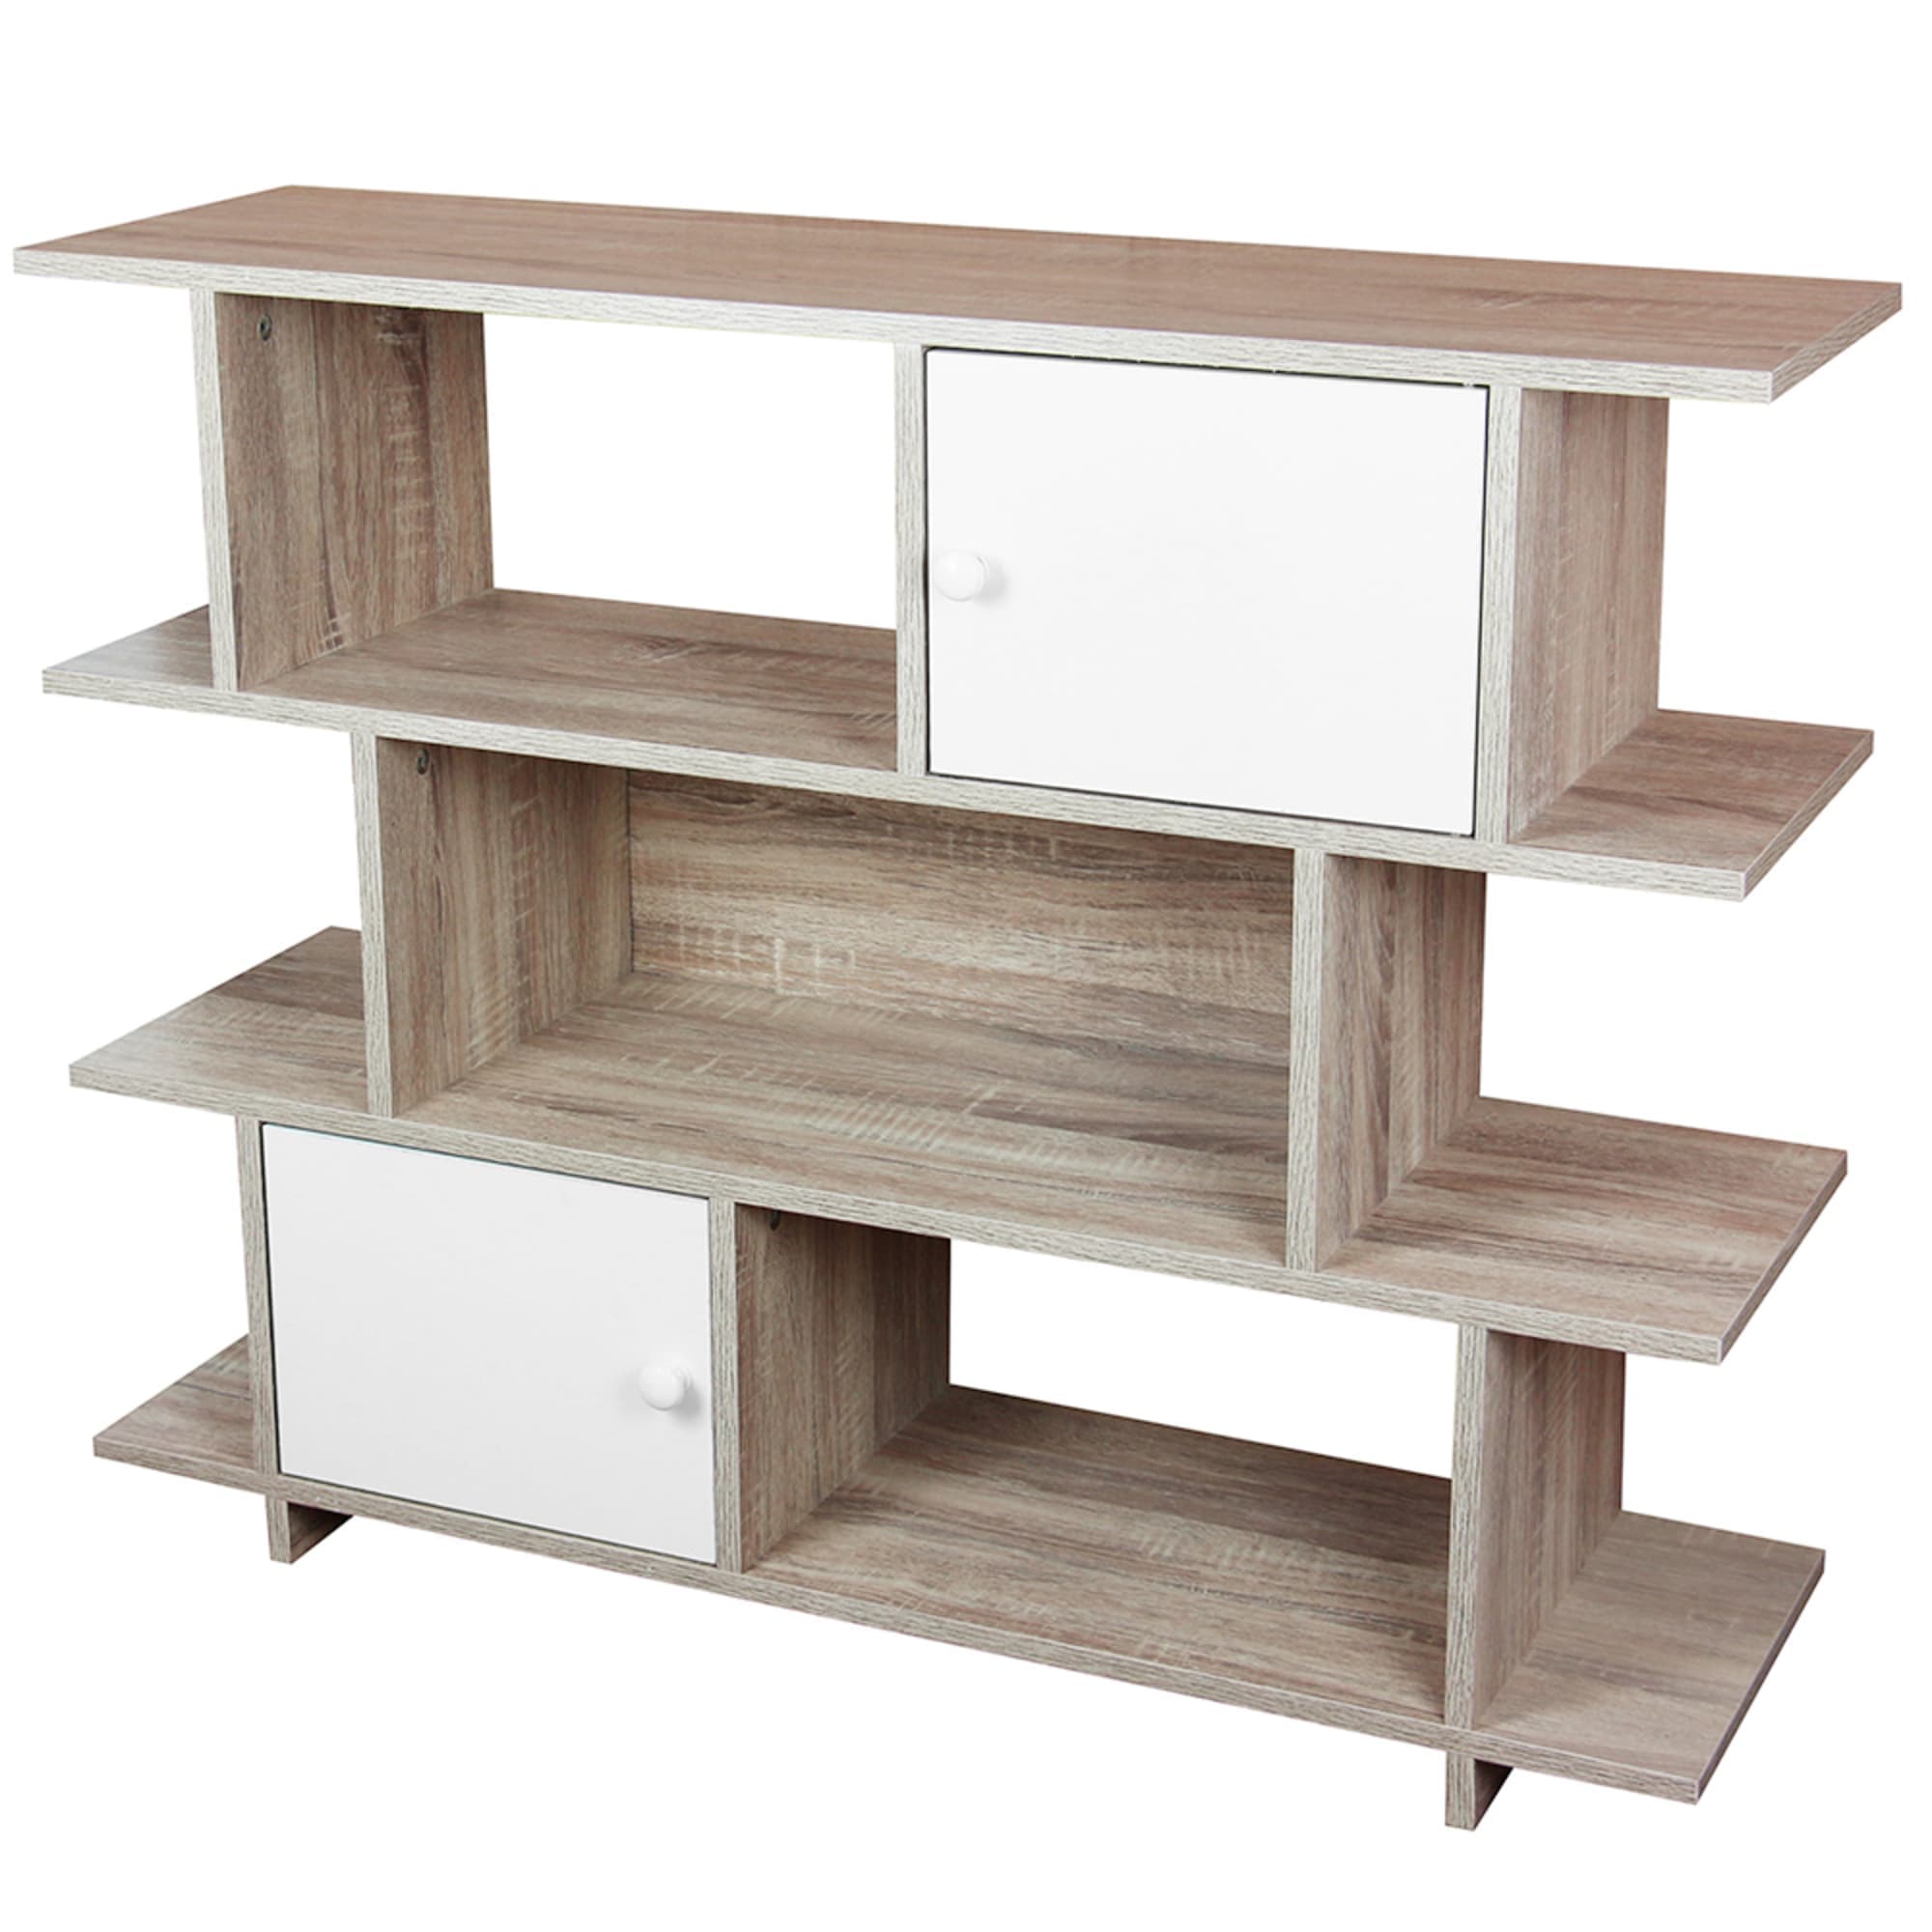 Home Basics 3 Tier Wood Display Book Shelf Organizer Unit with 2 Cabinet Doors, Oak $60 EACH, CASE PACK OF 1